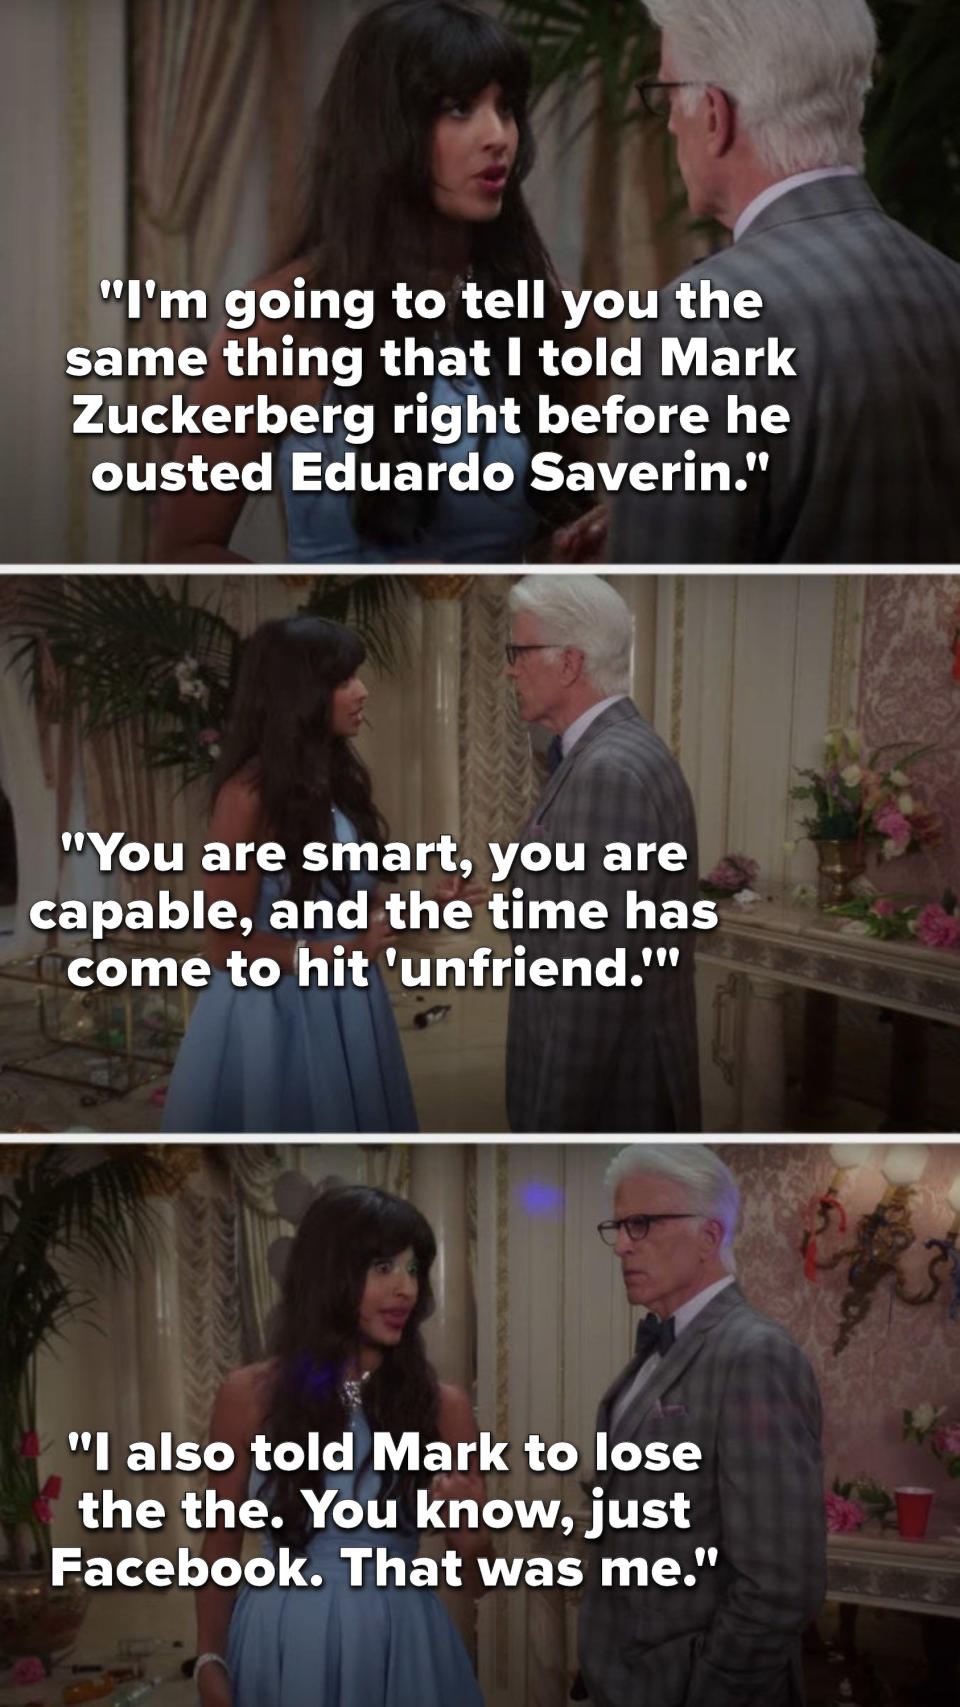 Tahani says, I'm going to tell you the same thing I told Mark Zuckerberg right before he ousted Eduardo Saverin, you are smart, you are capable, and the time has come to hit unfriend, I also told Mark to lose the the, you know, just Facebook, that was me